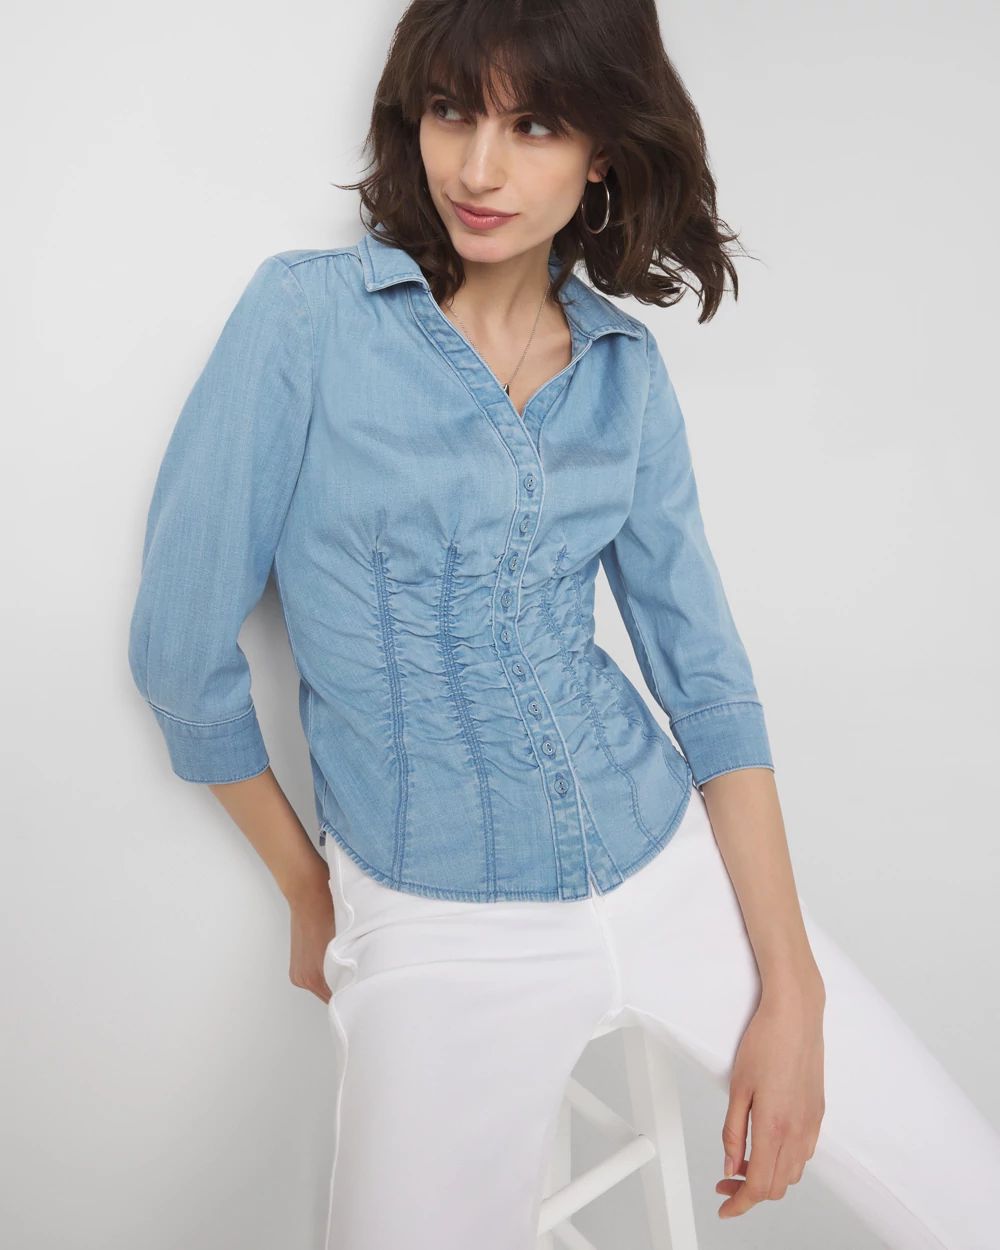 Elbow-Sleeve Ruched Detail Shirt click to view larger image.